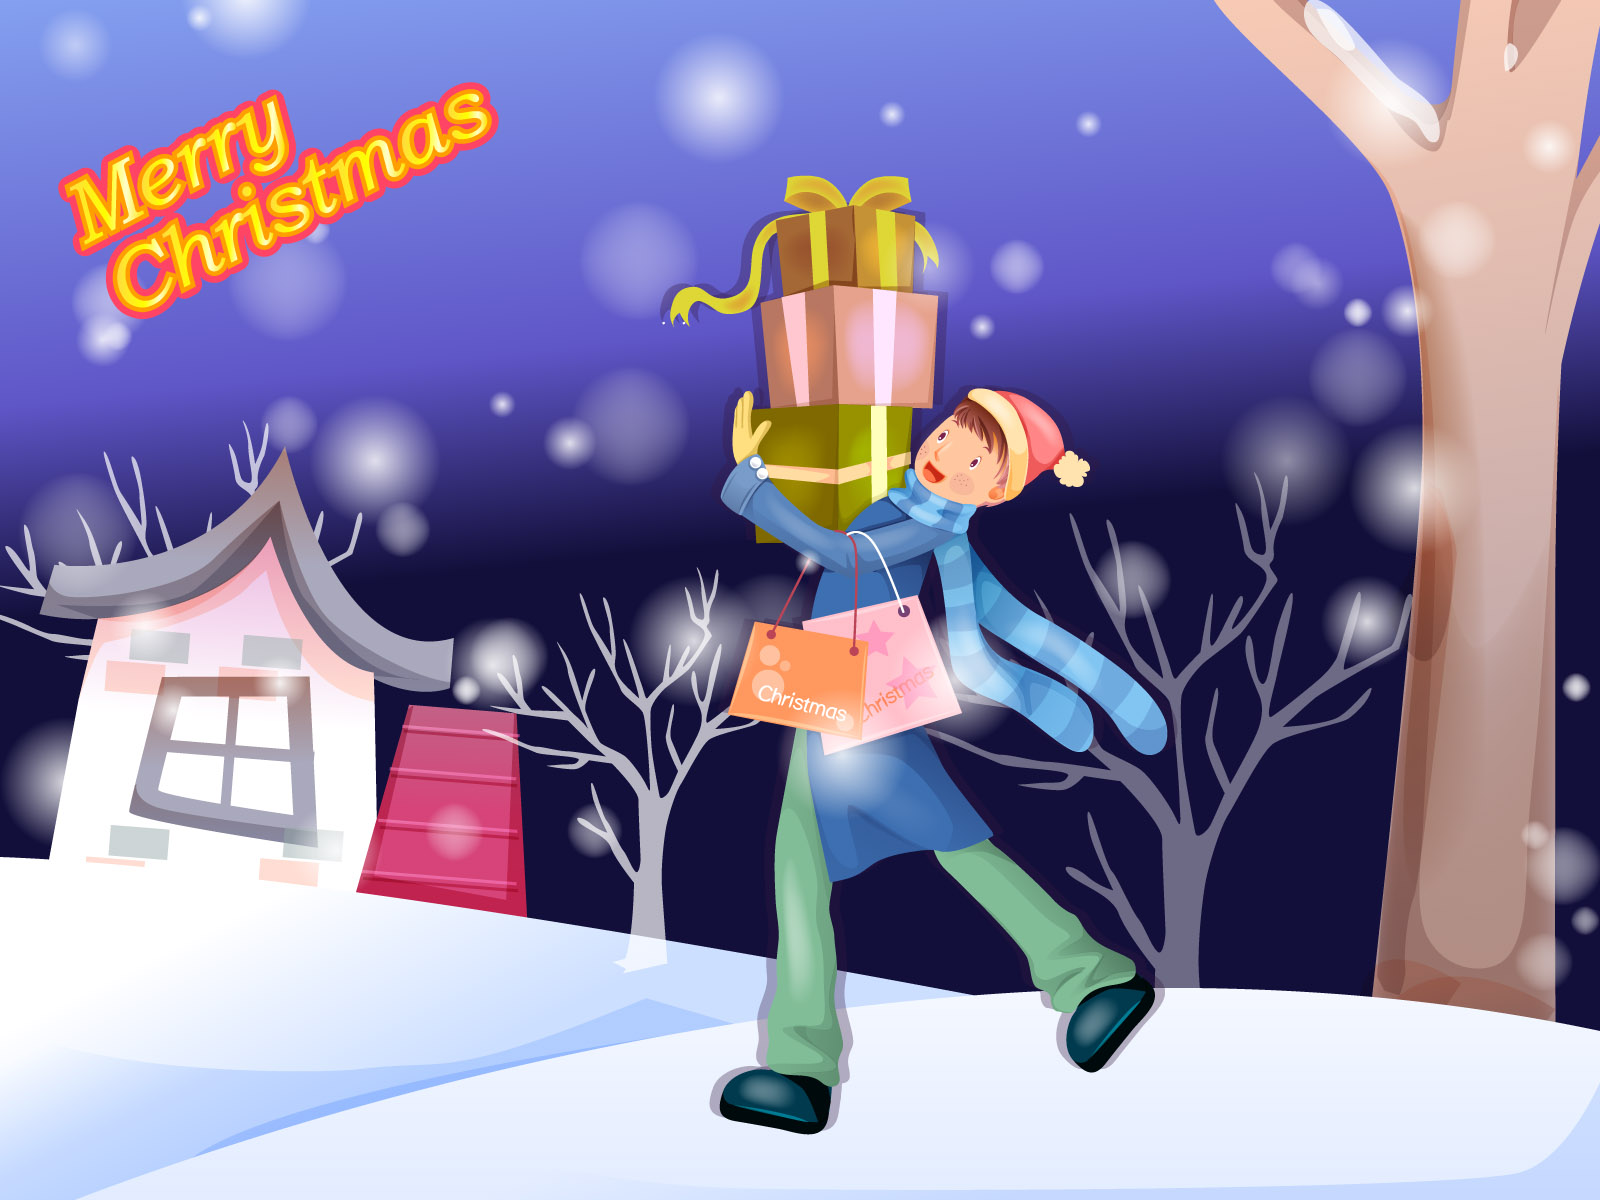 merry christmas wallpapers present